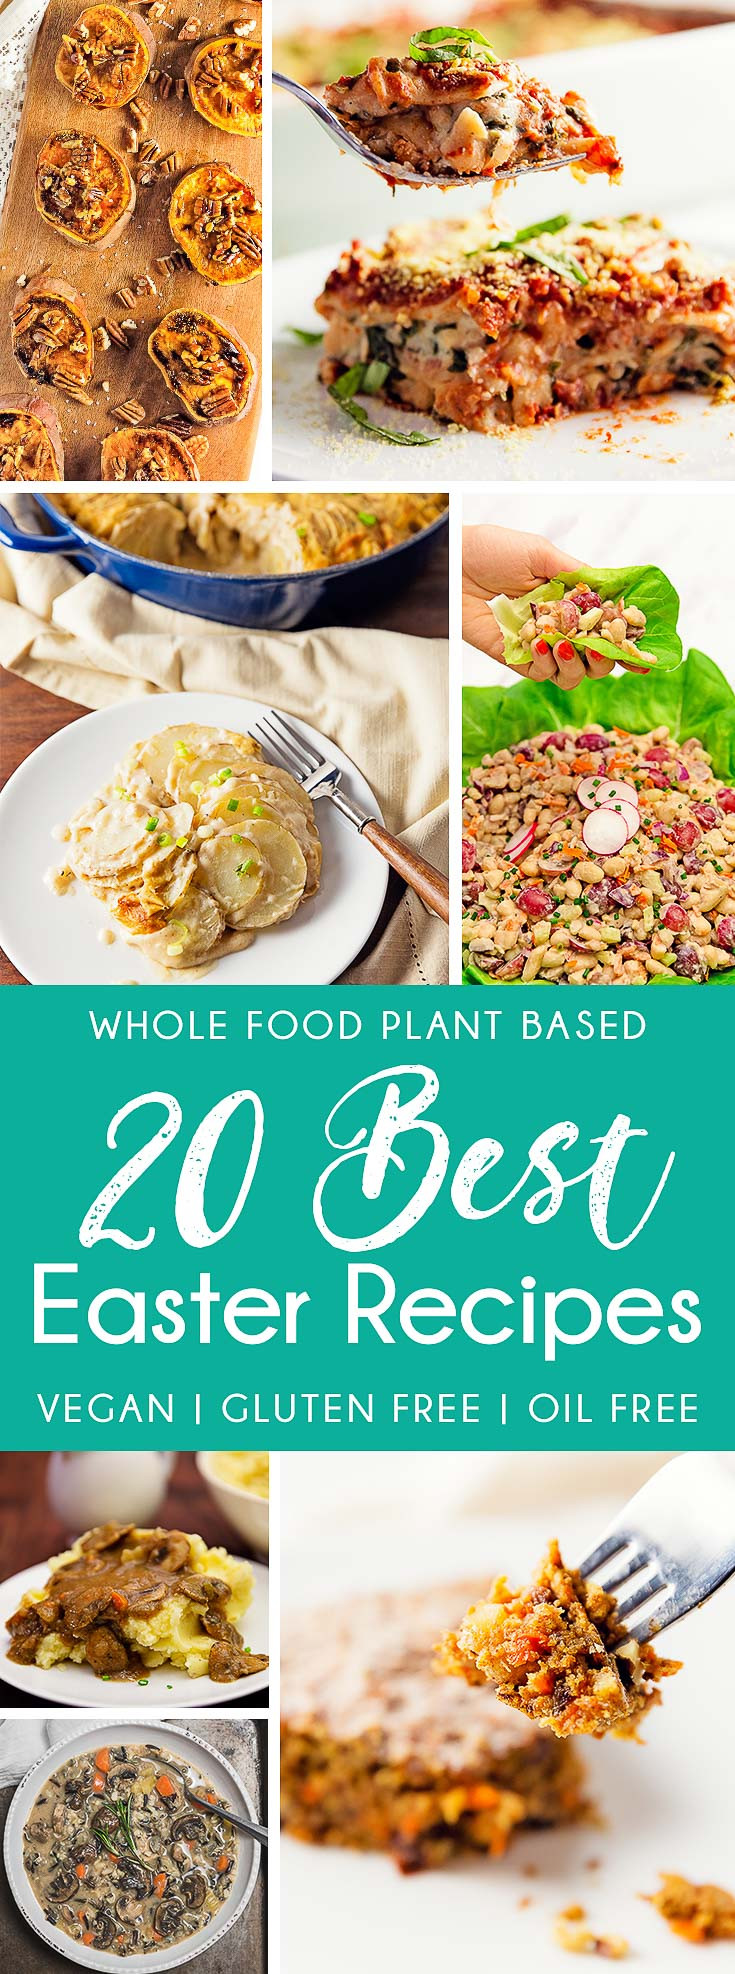 Whole Foods Easter Dinner
 20 Best Easter Recipes Monkey and Me Kitchen Adventures